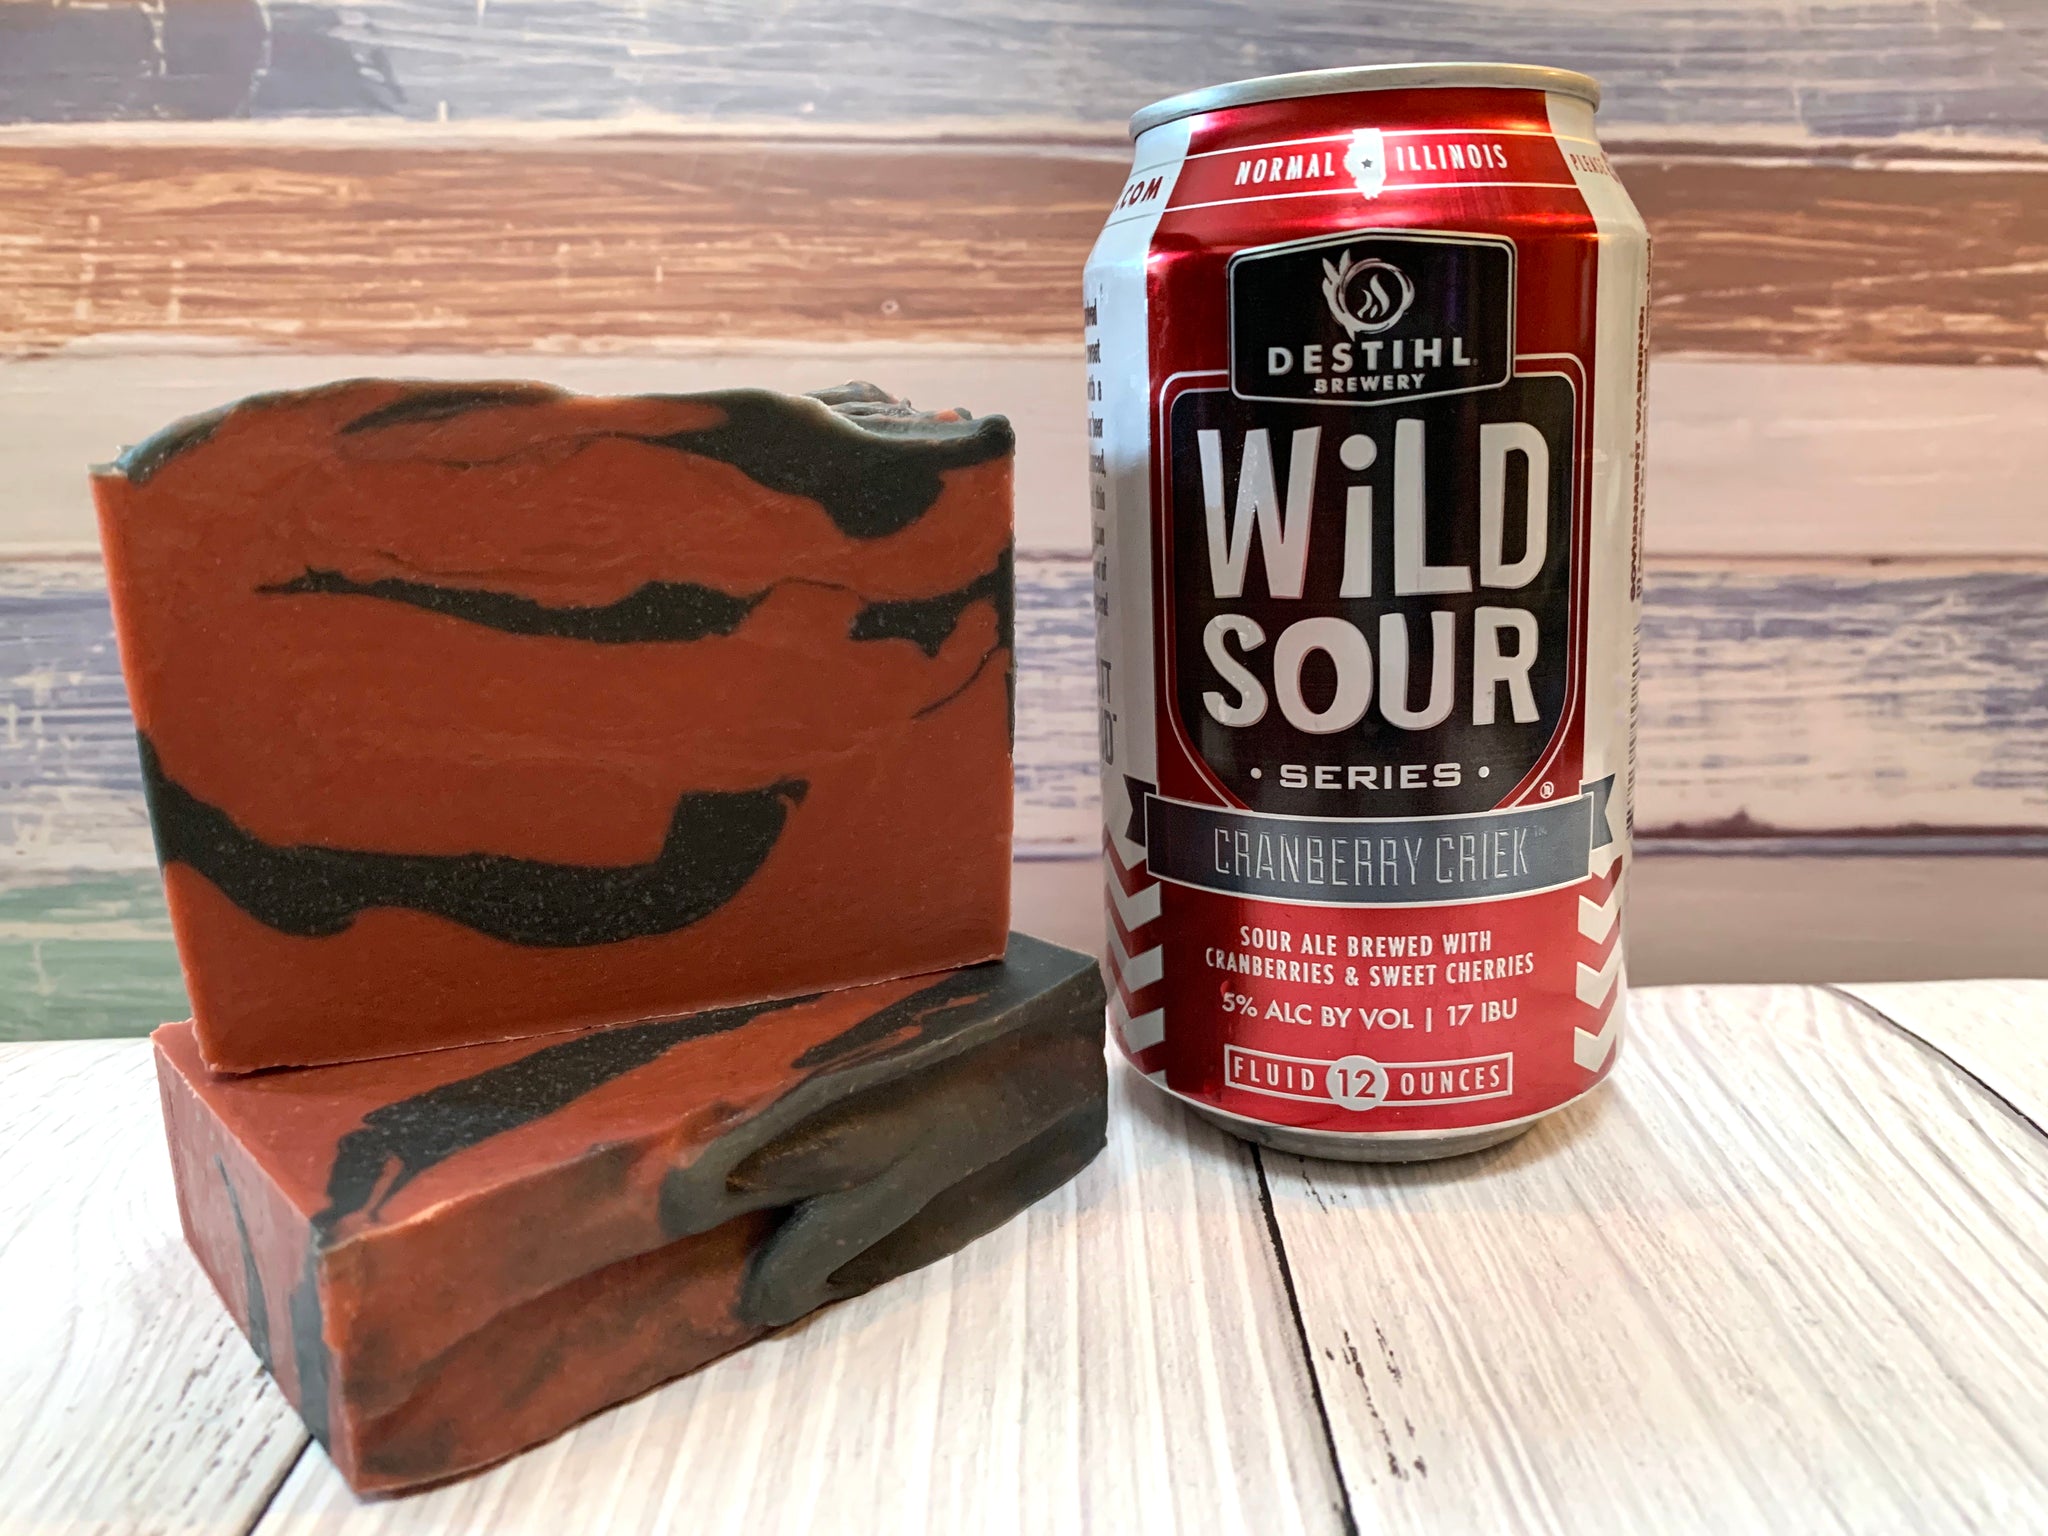 craft beer soap handmade with cranberry criek beer from destihl brewery normal Illinois cranberry beer soap with activated charcoal red and black beer soap spunkndisorderly